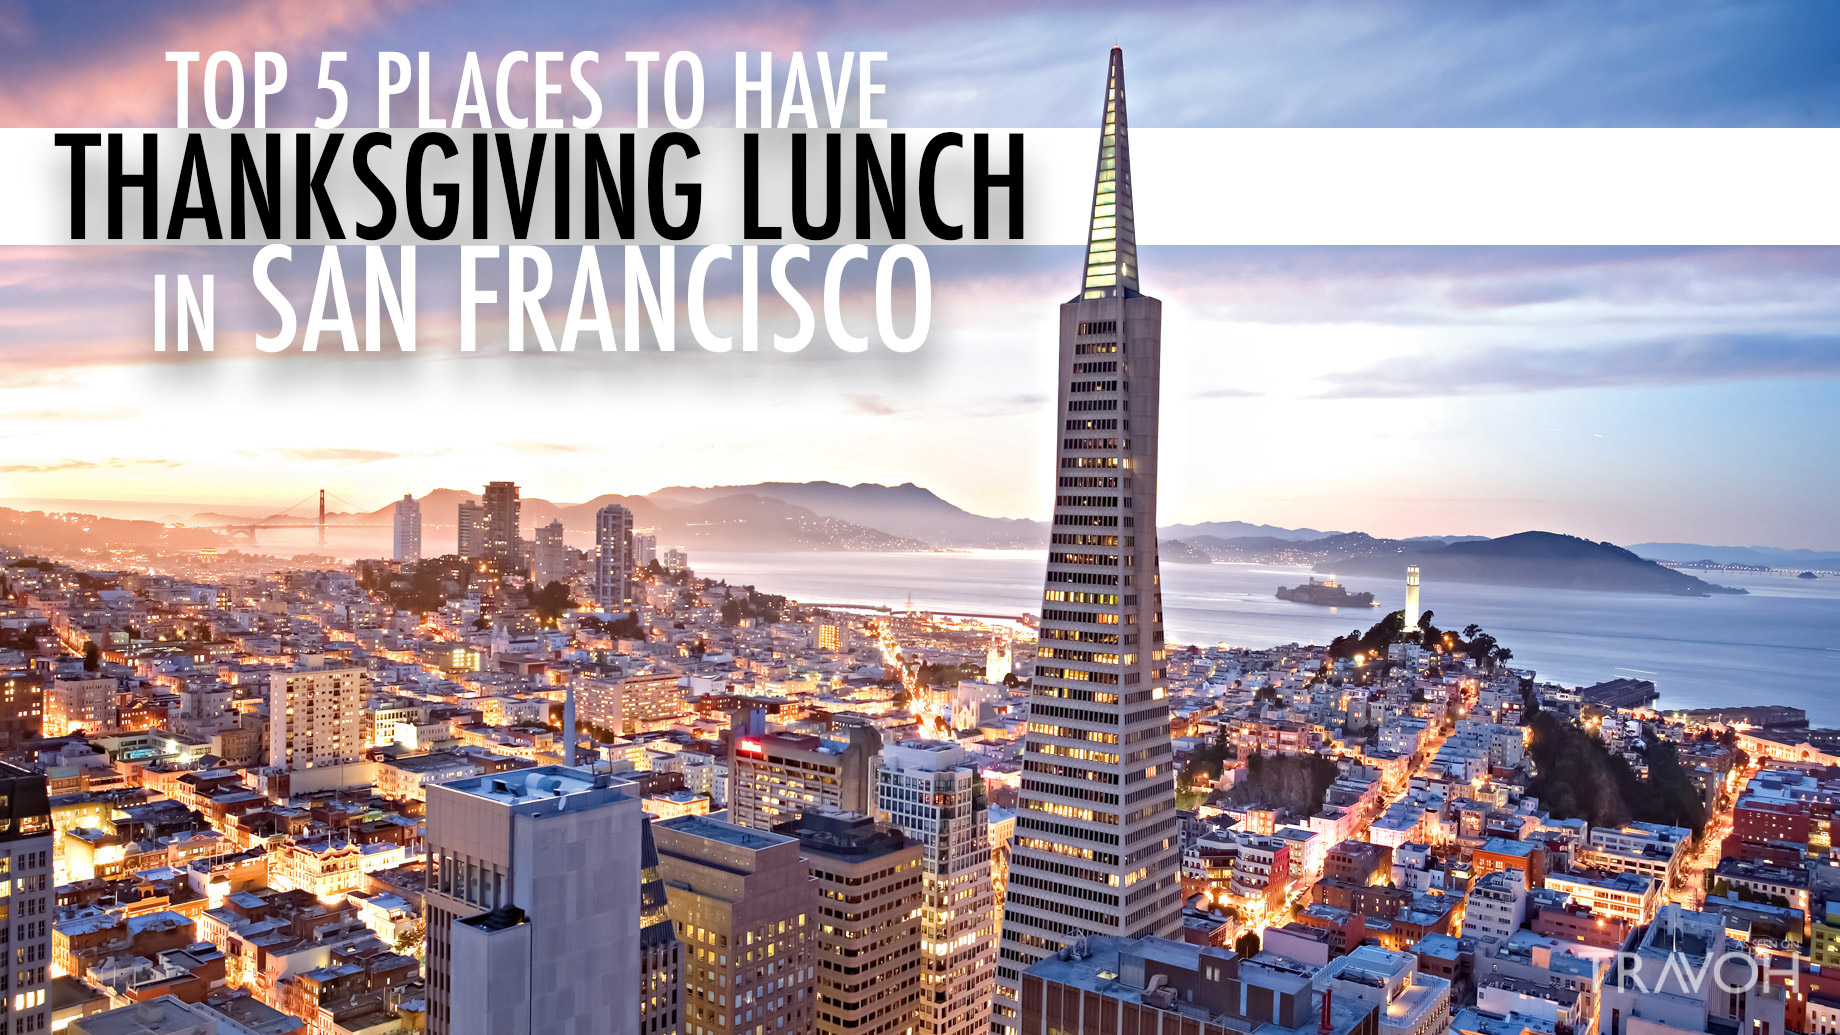 Top 5 Places to Have Thanksgiving Lunch in San Francisco